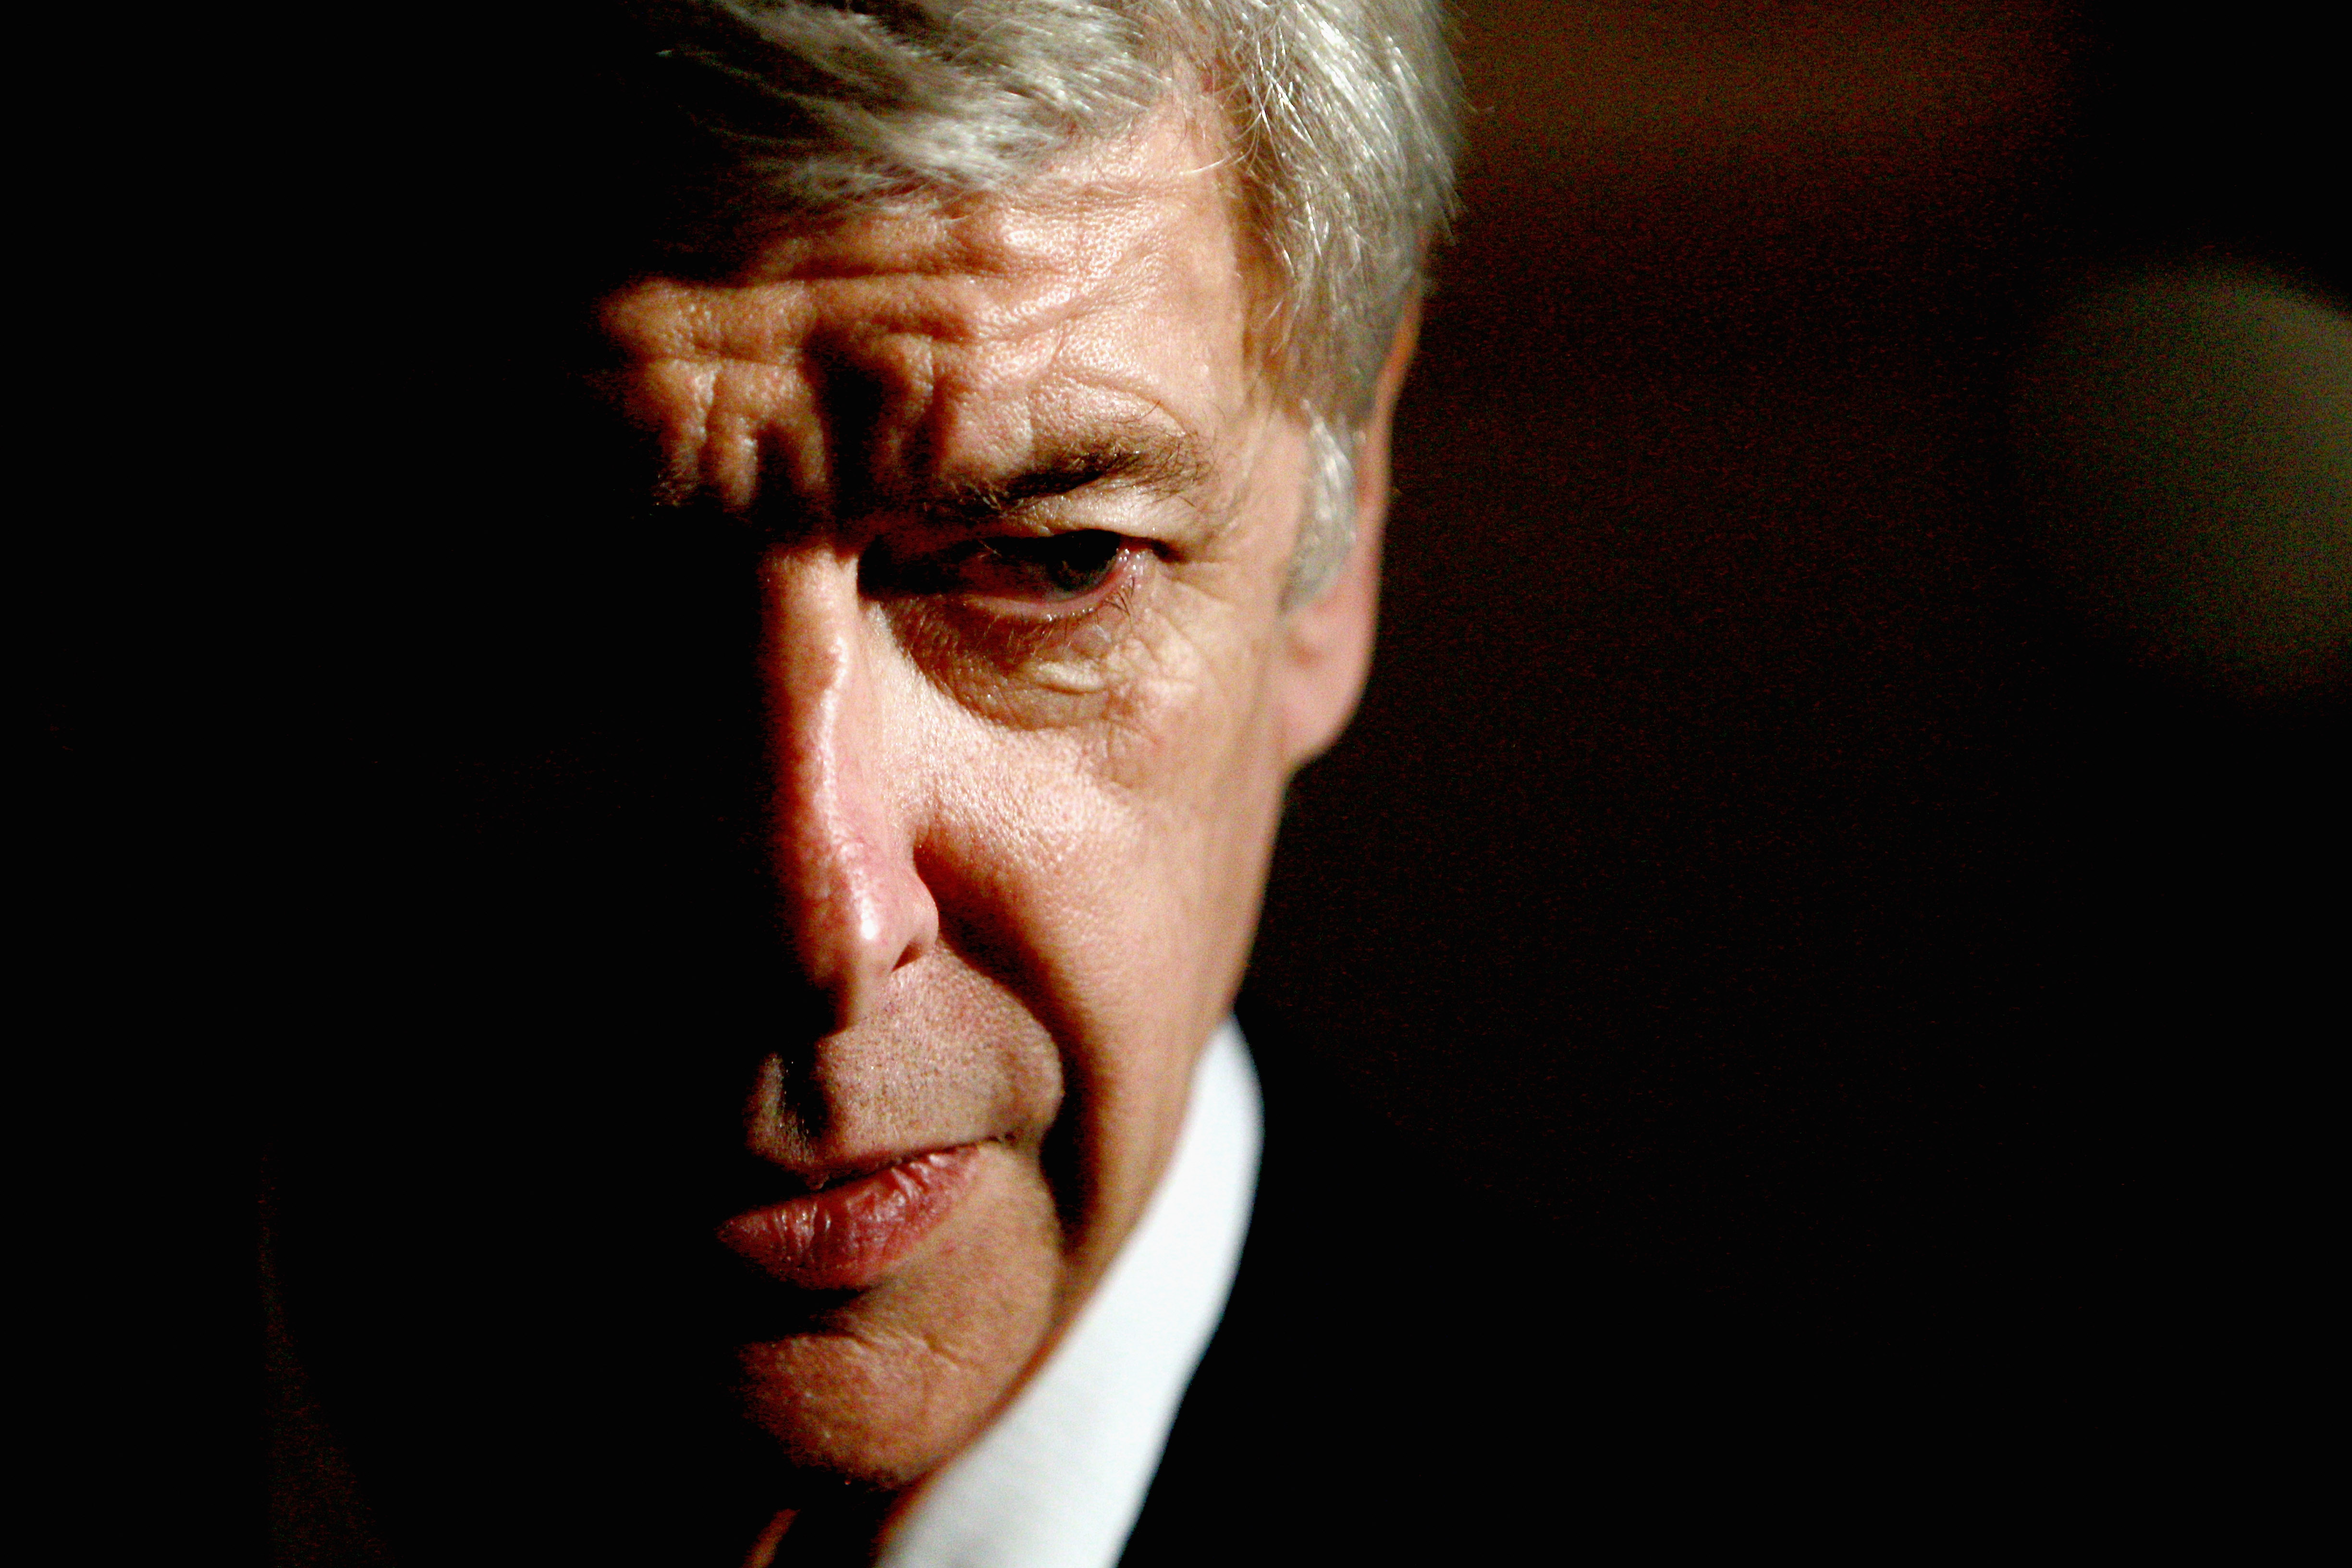 LONDON, ENGLAND - APRIL 07:  Arsenal Manager, Arsene Wenger is pictured showing his support for the 2018 Olympics Winter Games bid presentation for Annecy at the Park Plaza Westminster Bridge Hotel on April 7, 2011 in London, England.  (Photo by Dean Mouh